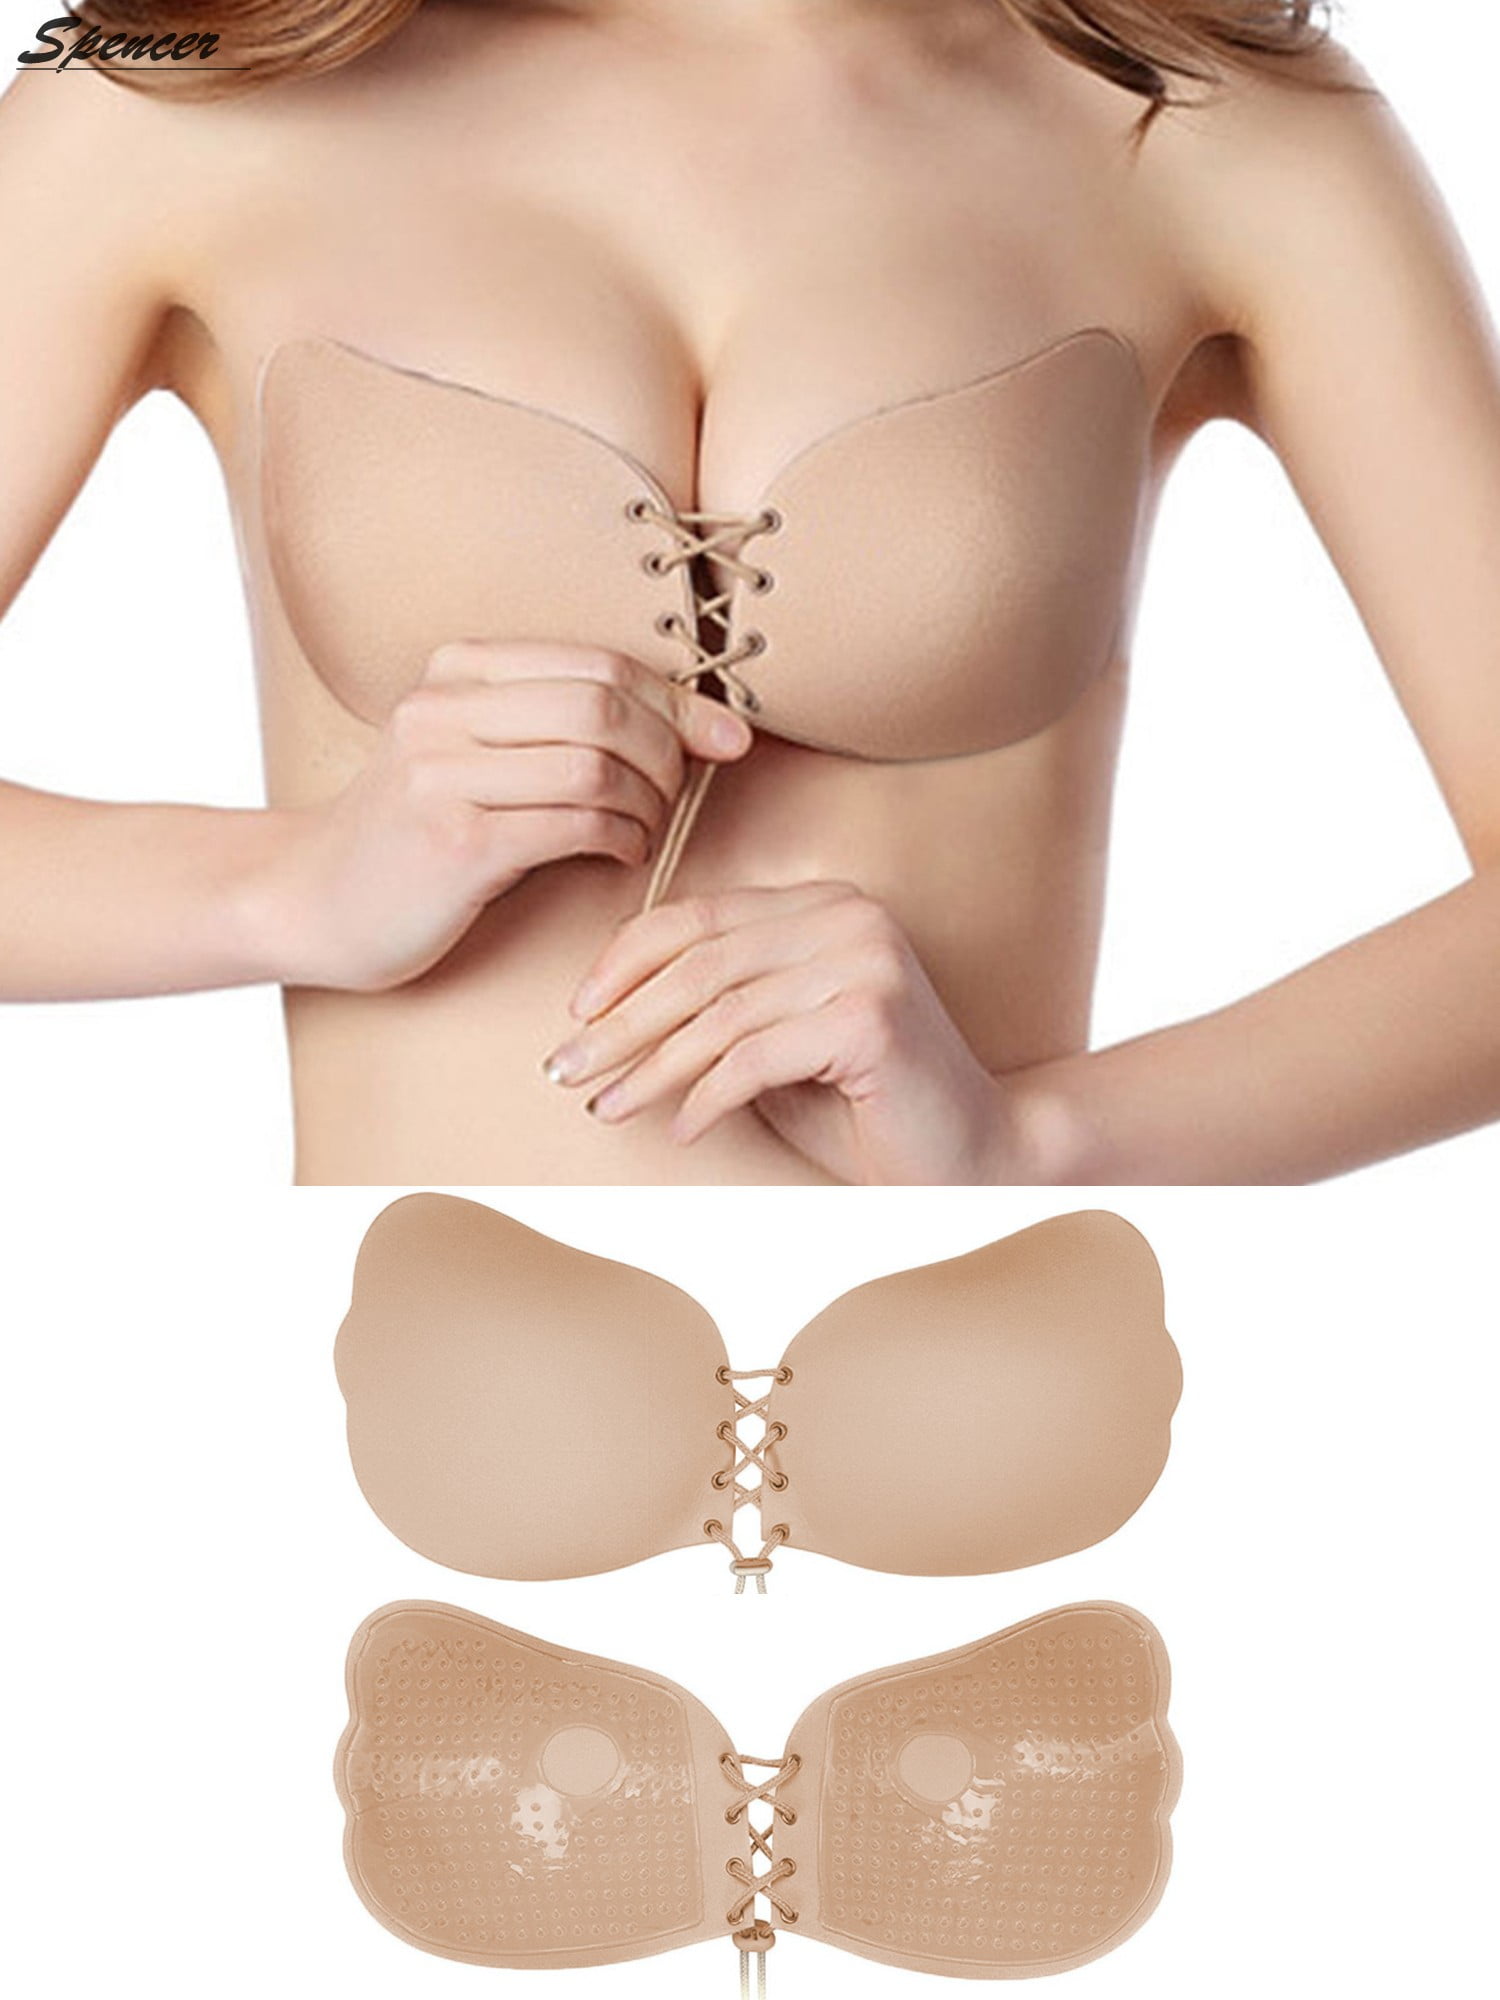 2 Pack Adhesive Bra Strapless Adhesive Bra Push Up Backless Bra for Women C-Cup